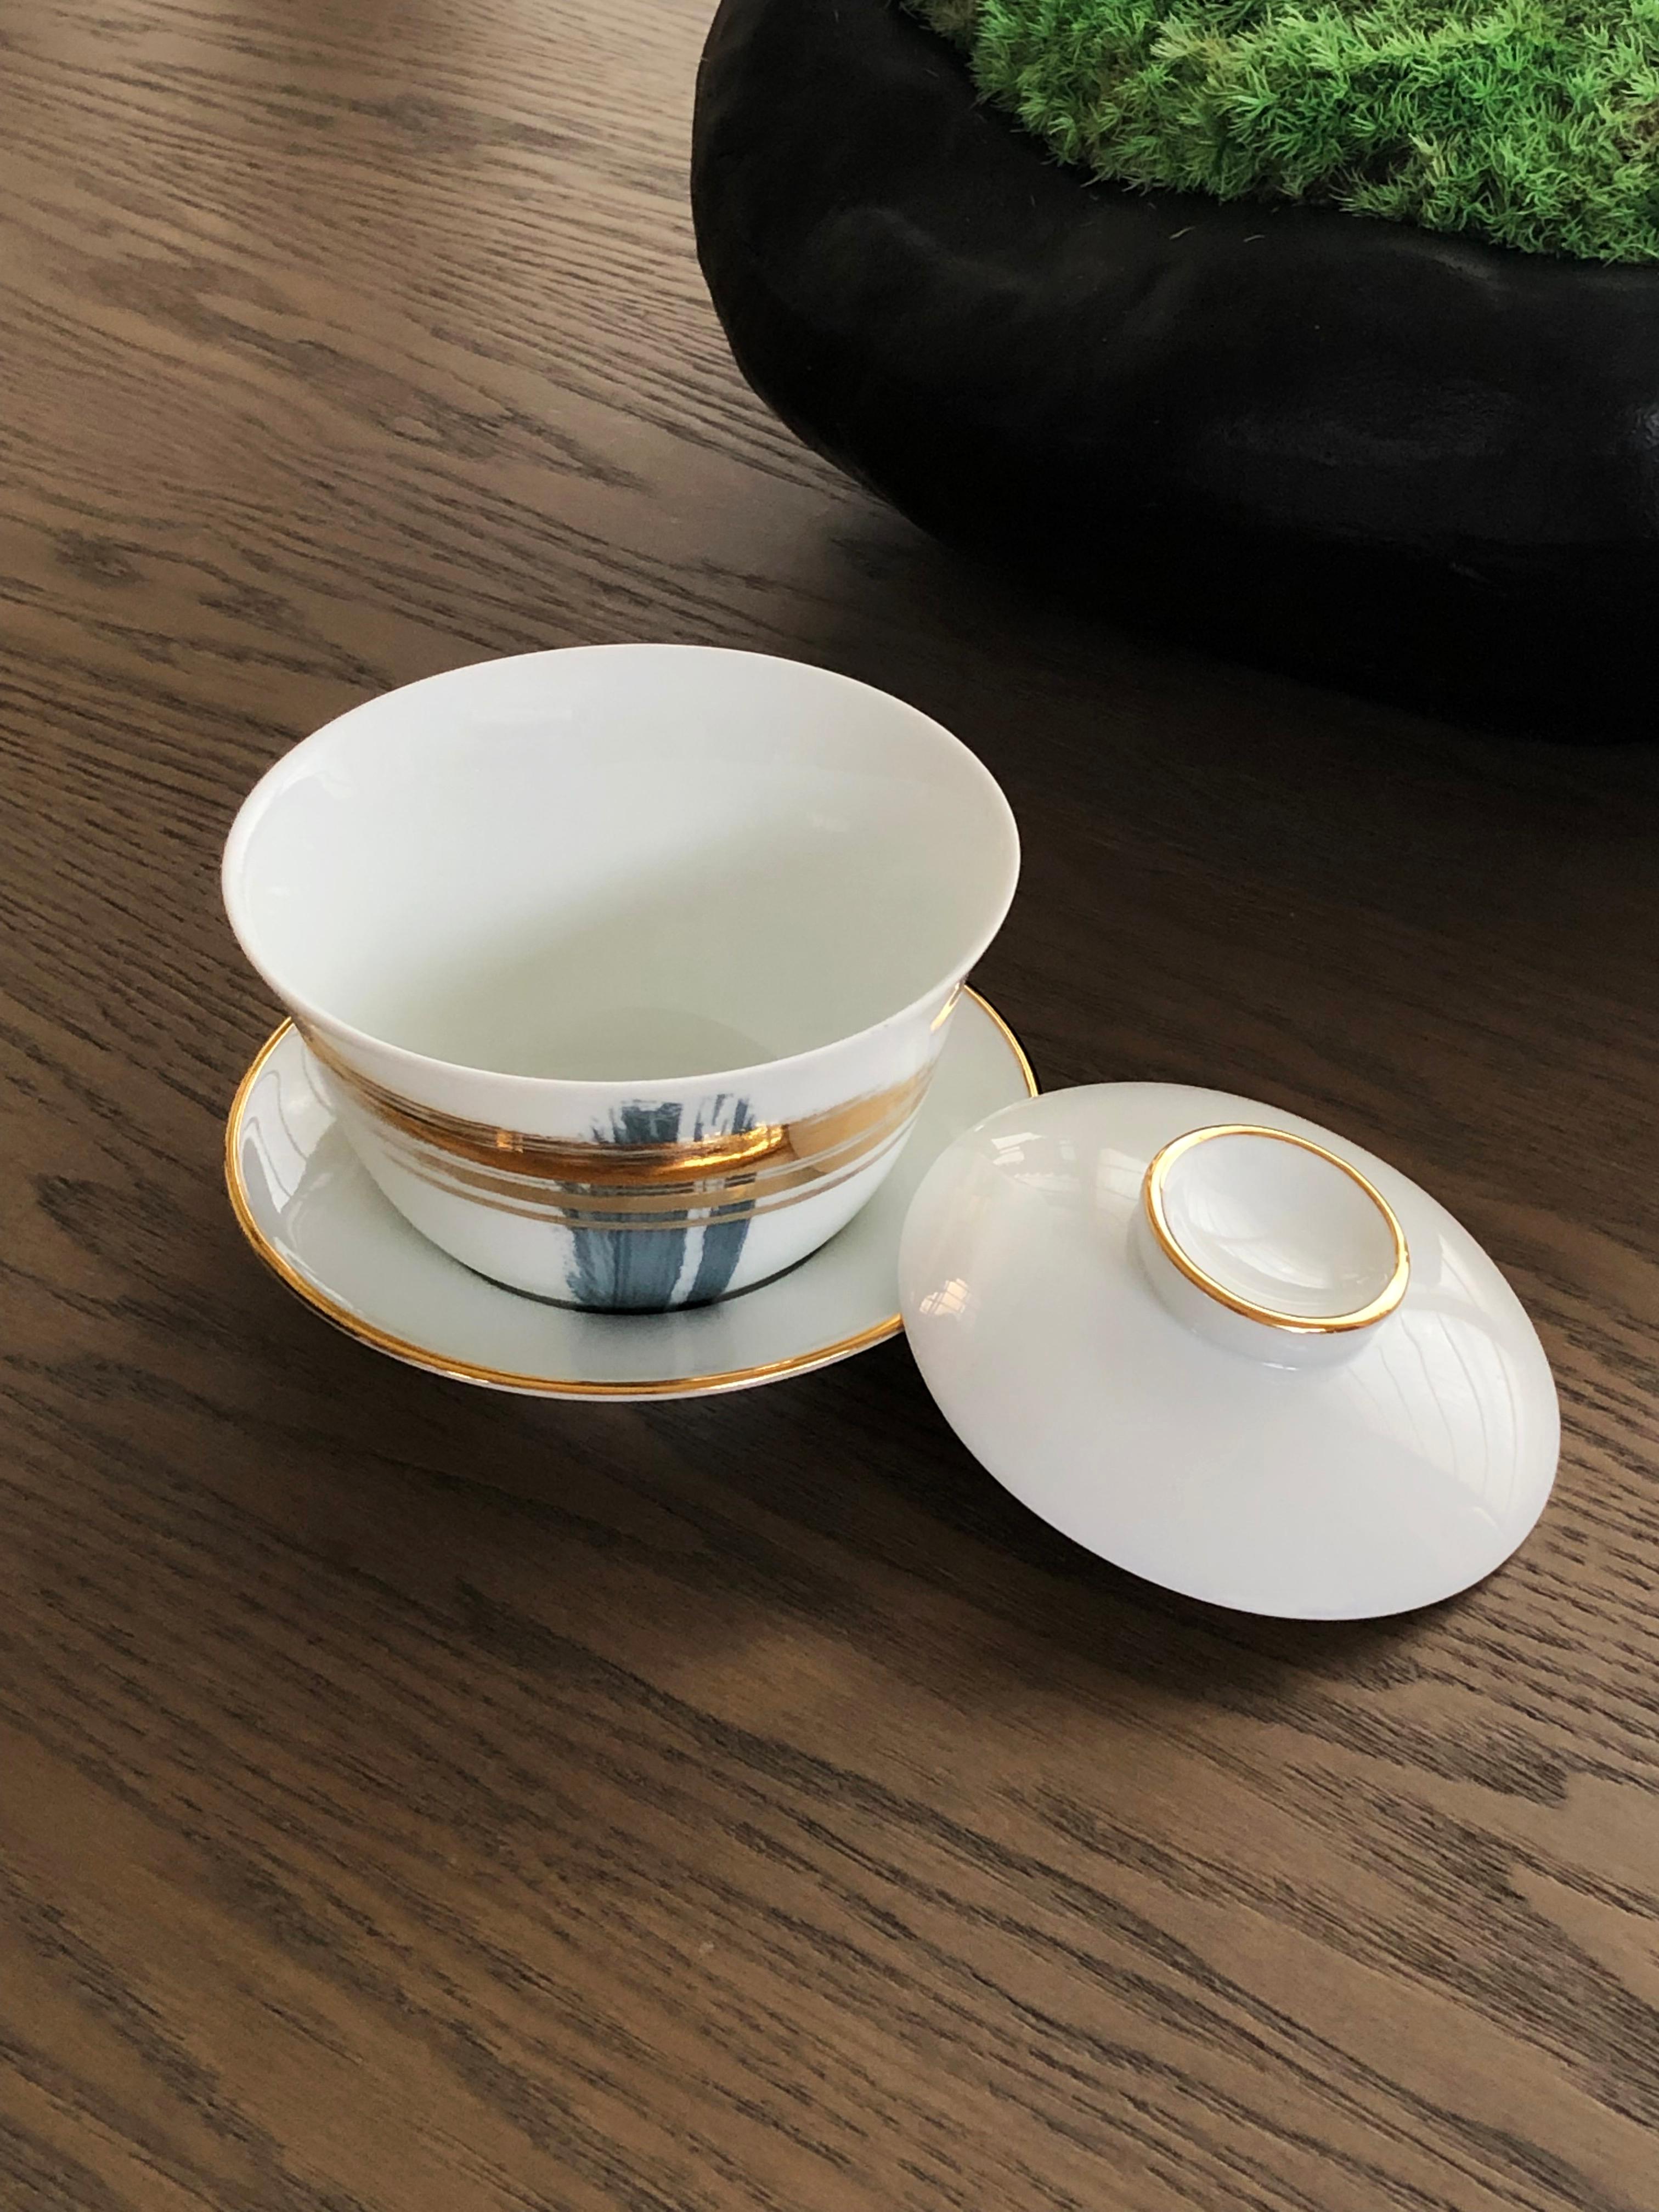 Larger quantities available upon request, with 8 weeks production time.

Description: Chinese tea cup gaiwan set (2 pieces)
Color: Blue and gold
Size: 11 Ø x 10 H cm, 225 ml
Material: Porcelain and gold
Collection: Artisan Brush